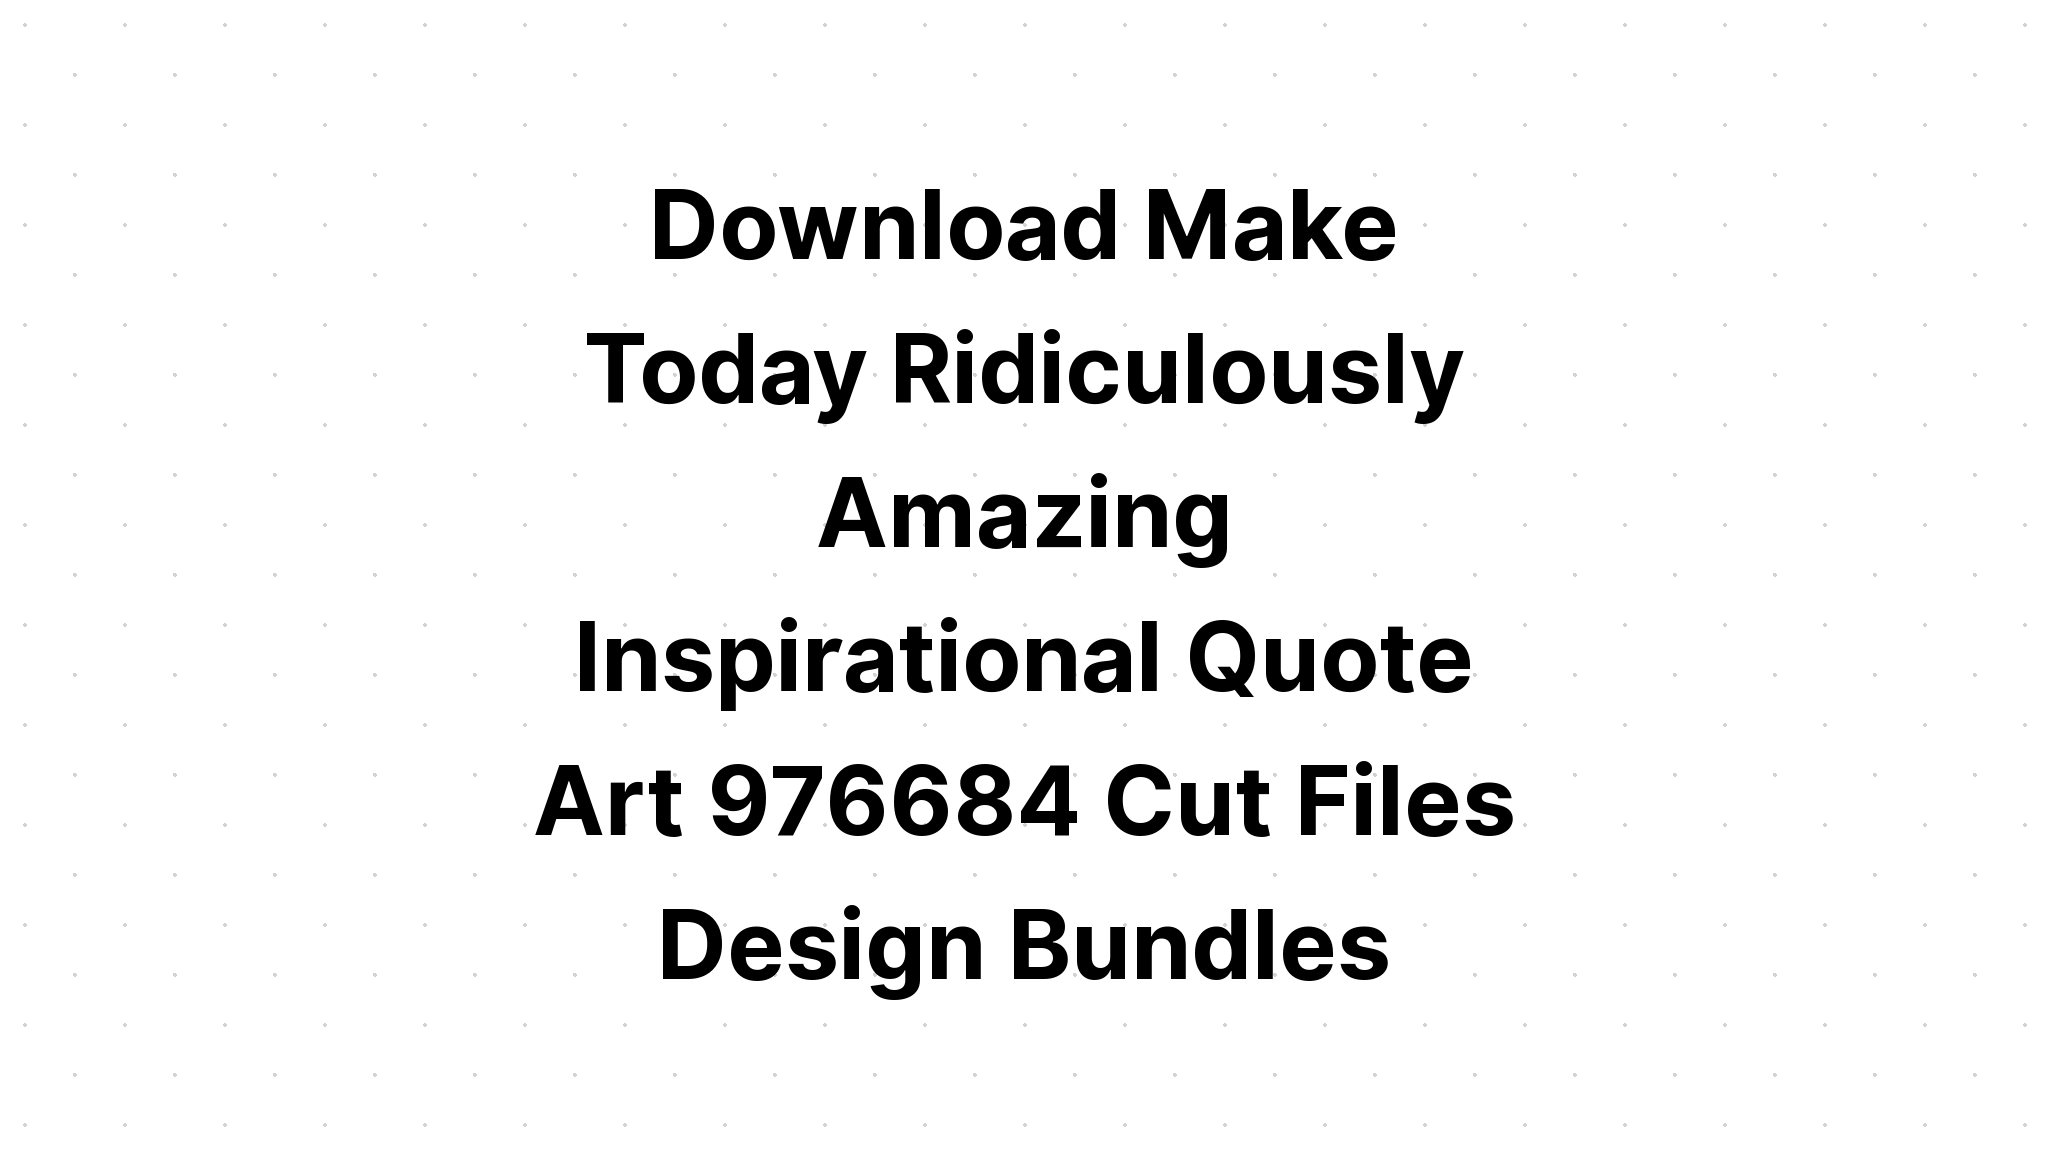 Download Make Today Ridiculously Amazing SVG File